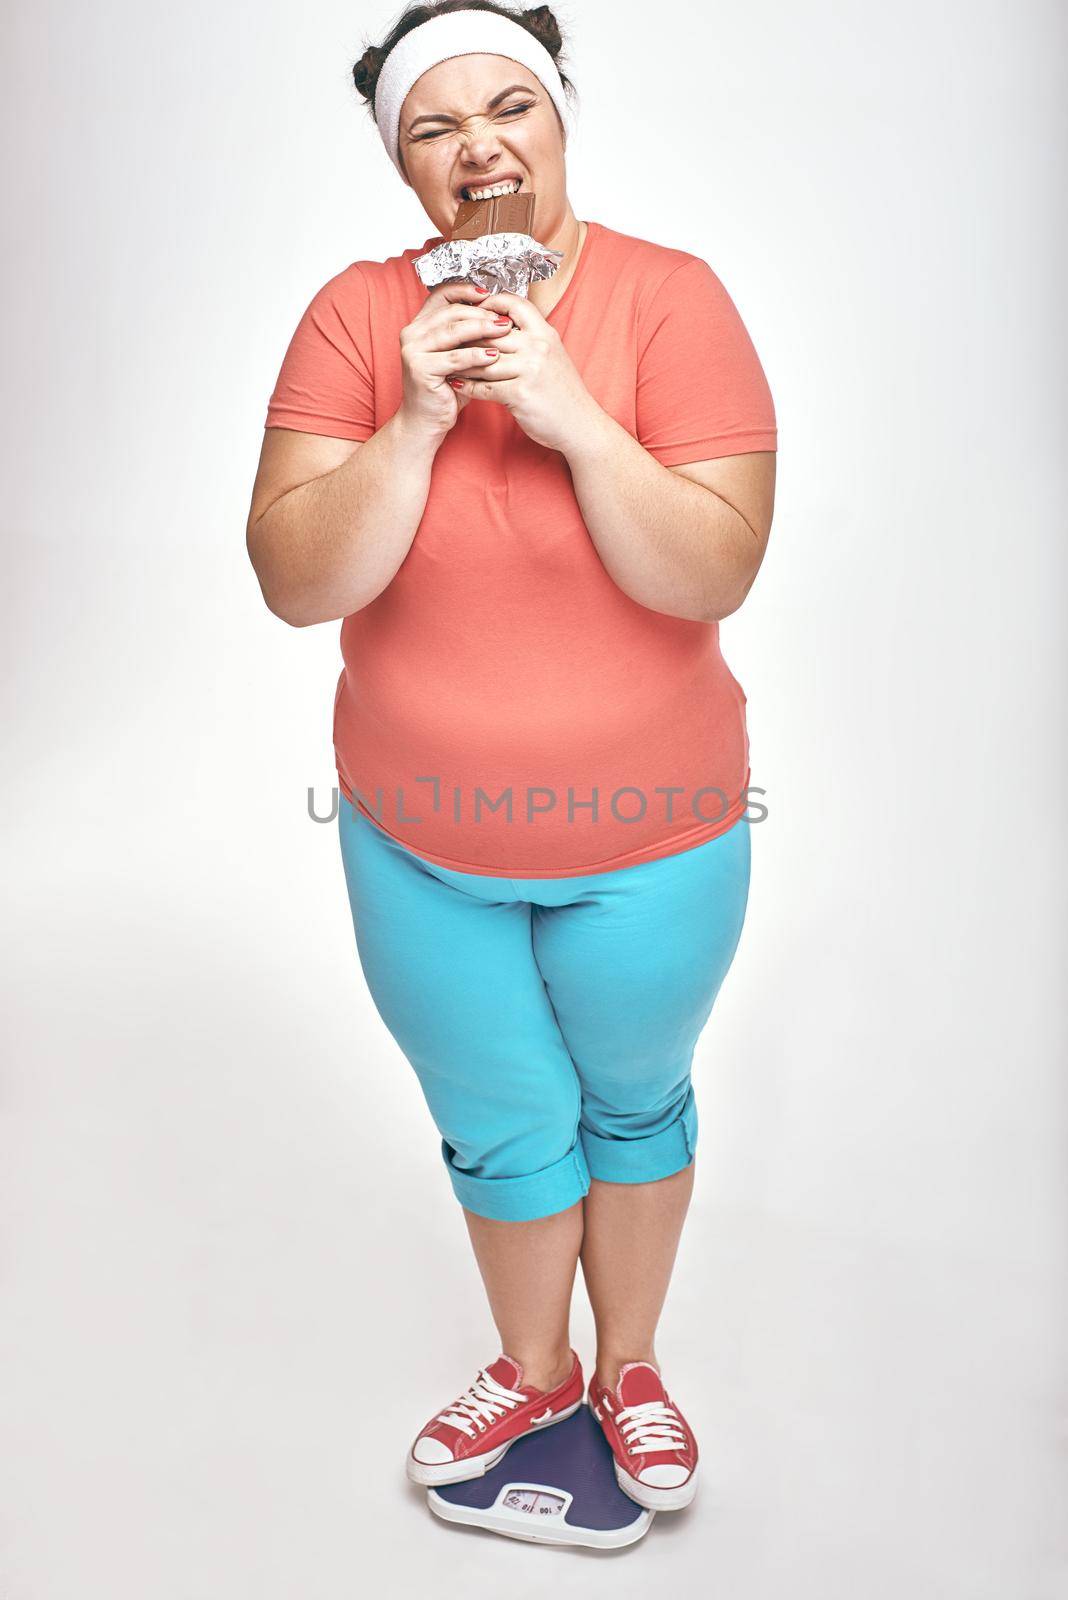 Amusing, chubby woman is eating chocolate while standing on the scales by friendsstock